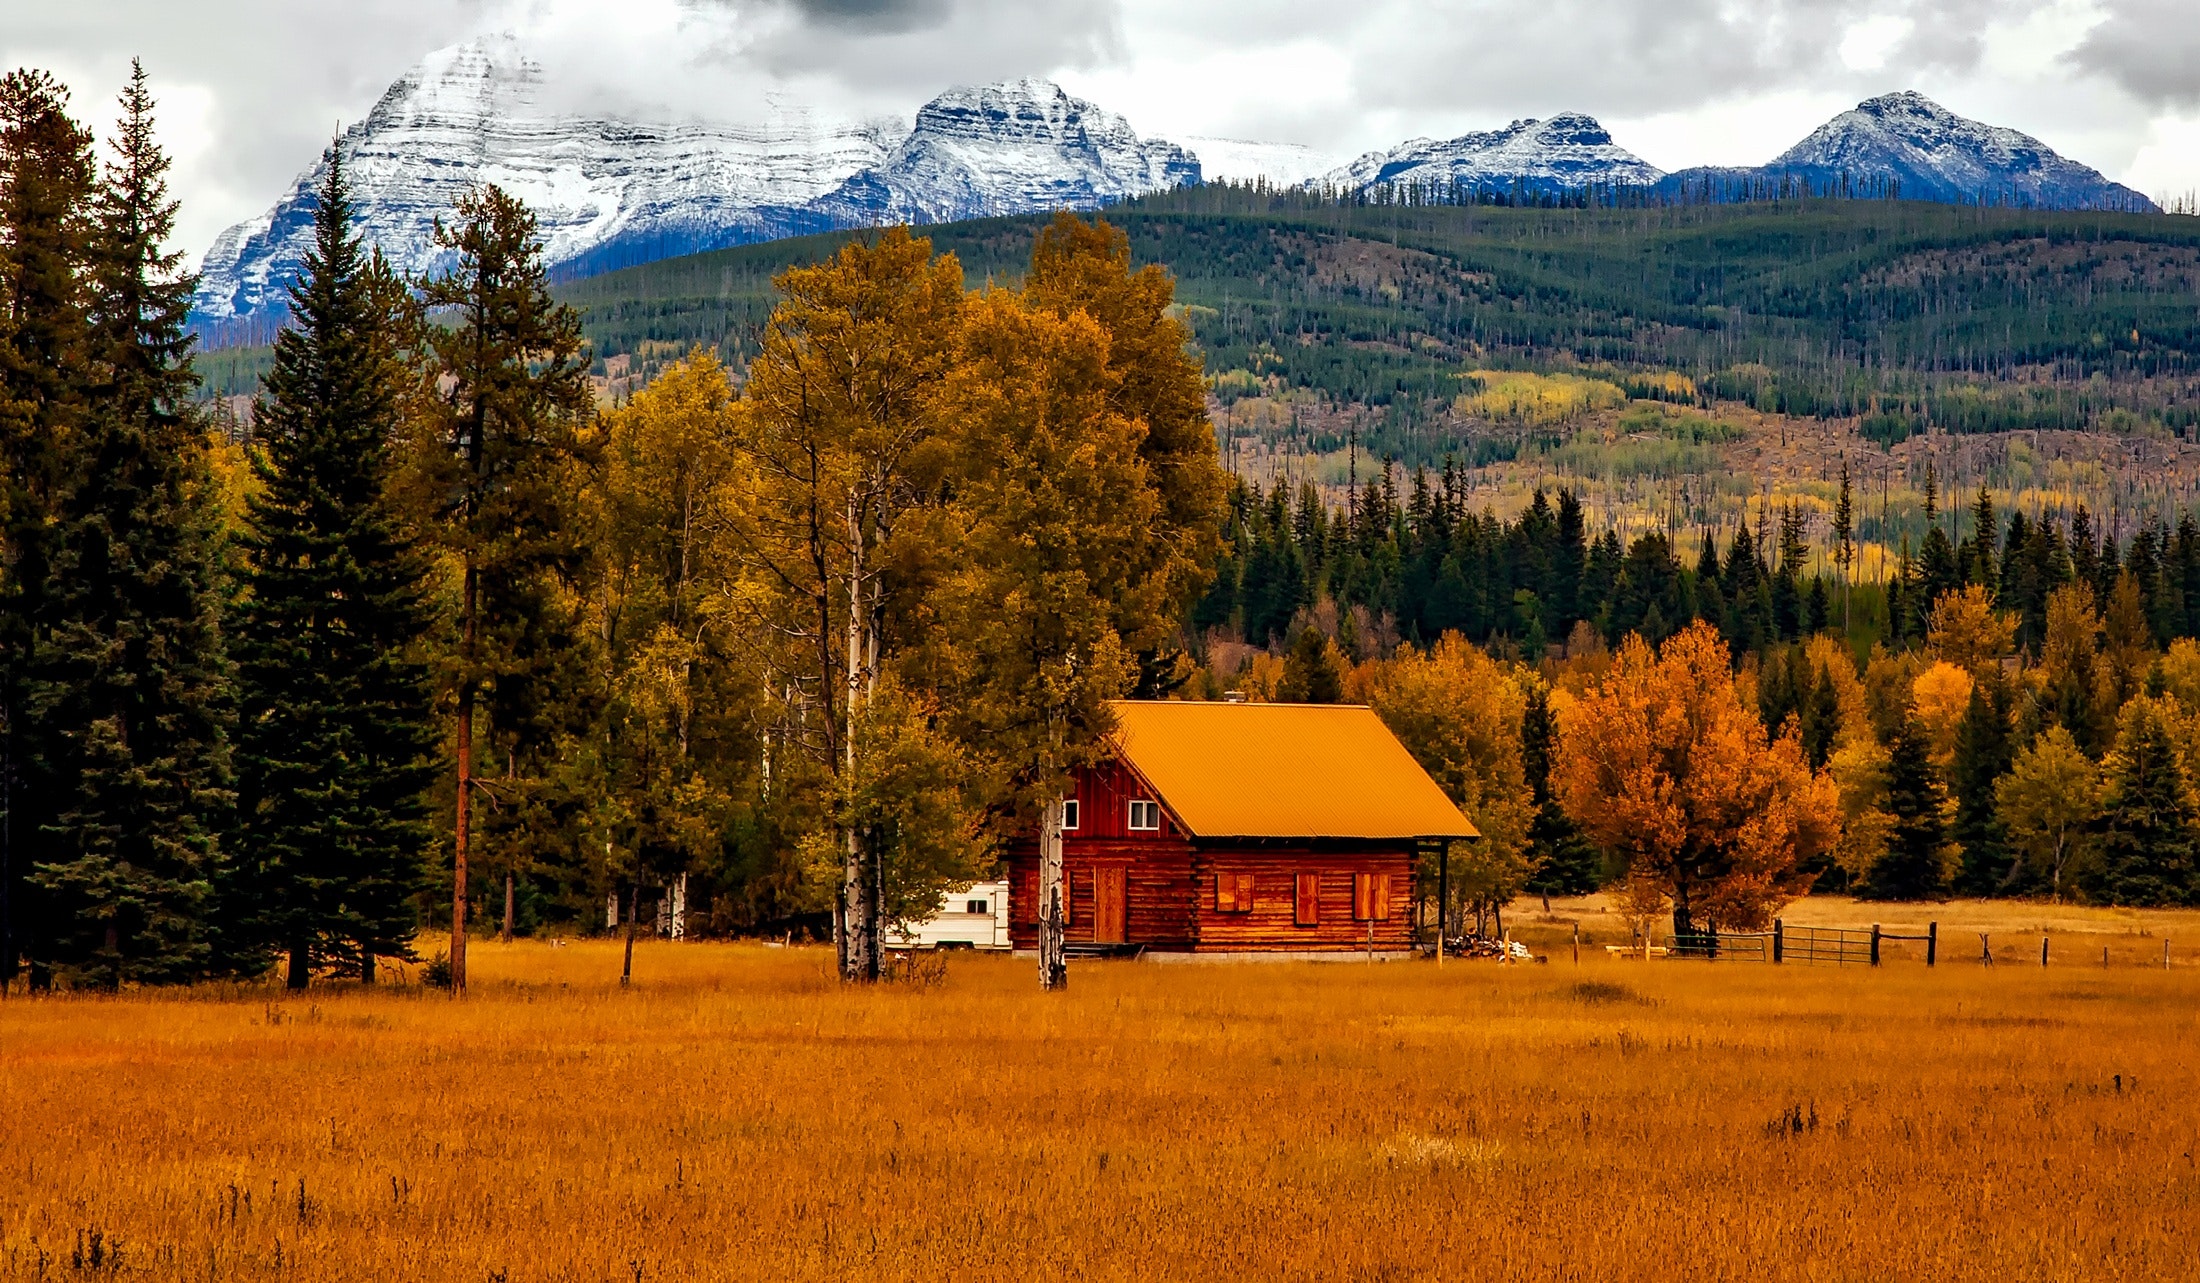 Landscape shot with a barn in Colorado